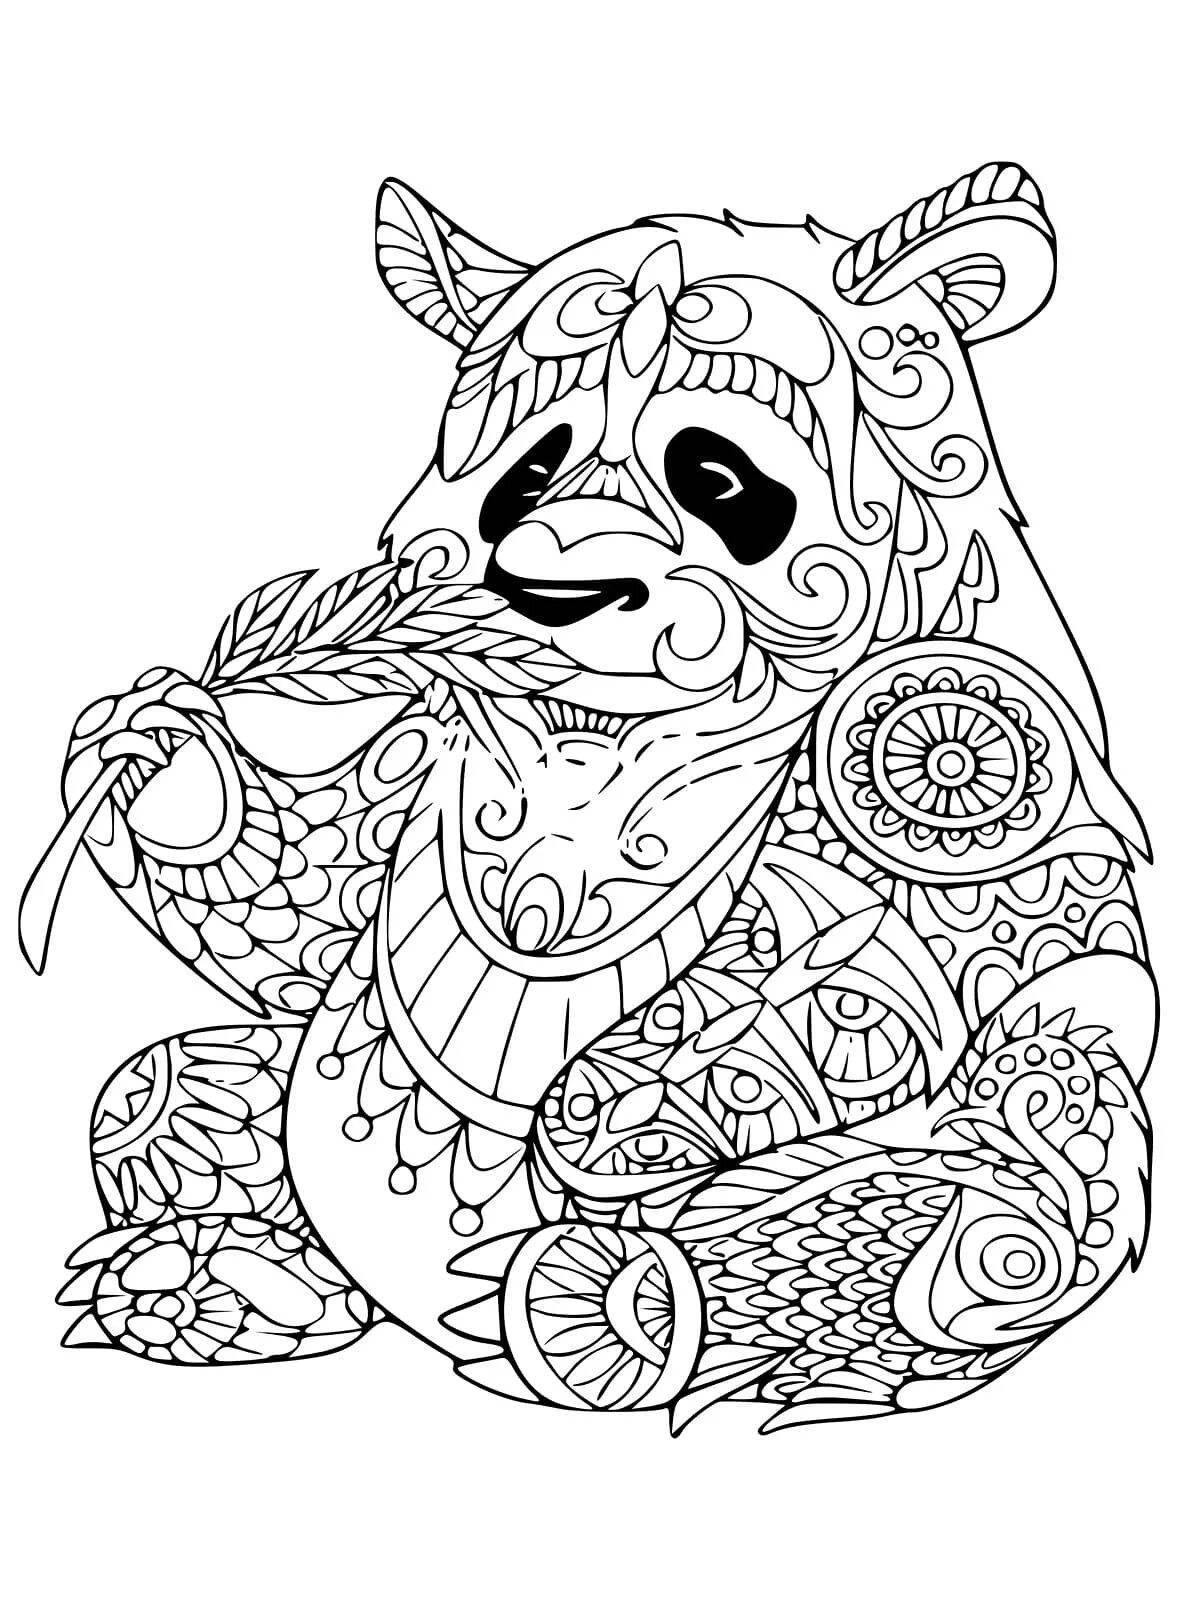 Majestic 15 years antistress coloring page